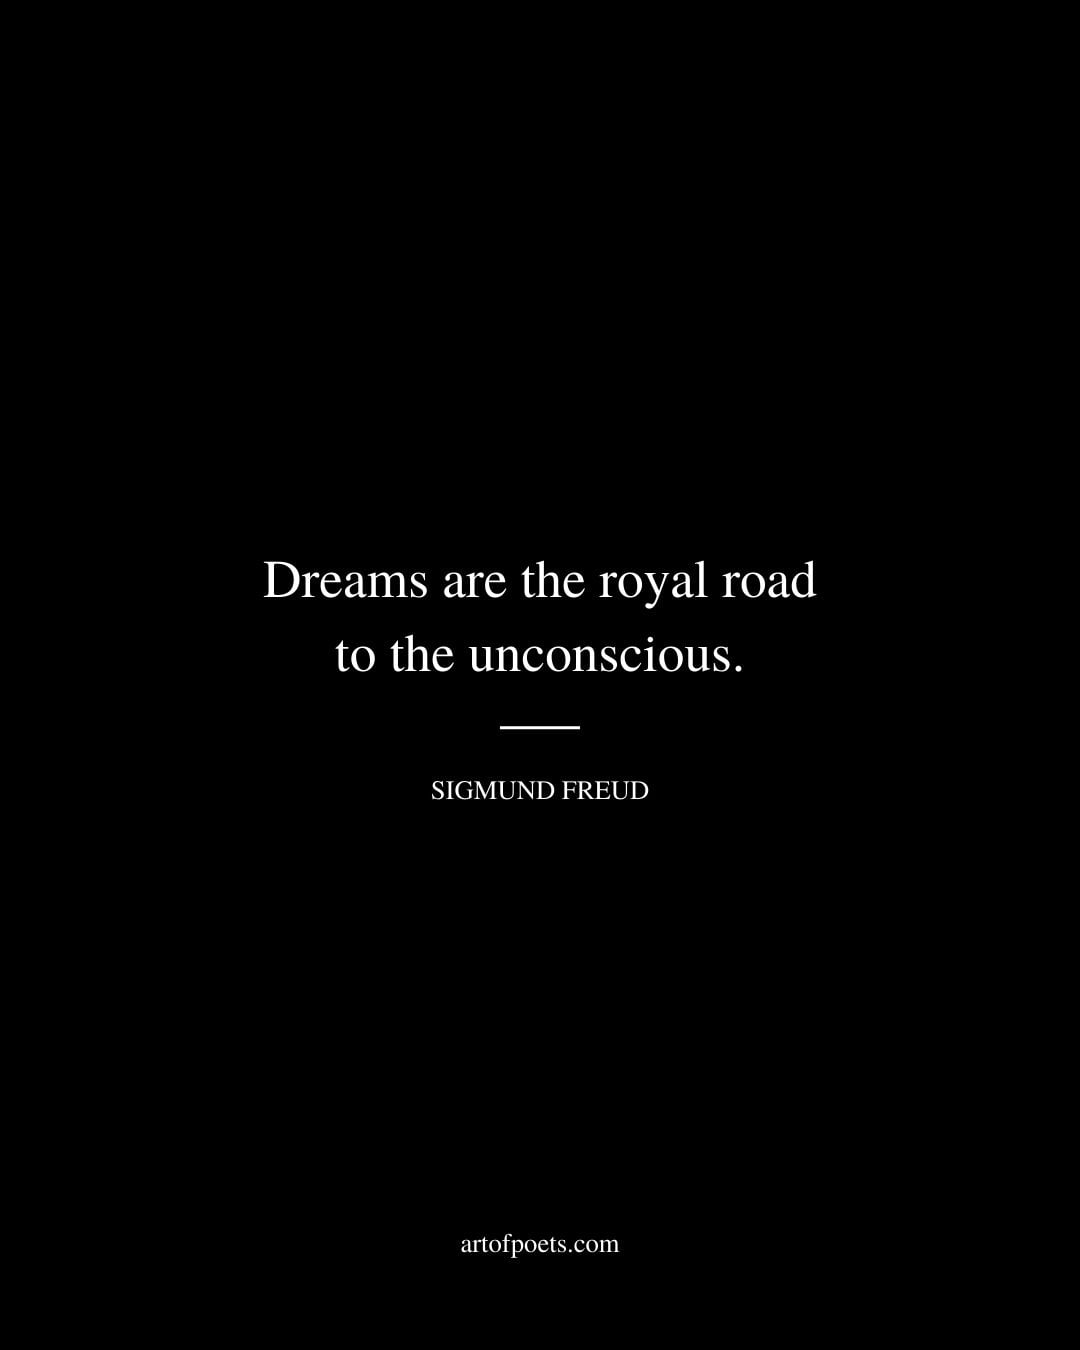 Dreams are the royal road to the unconscious